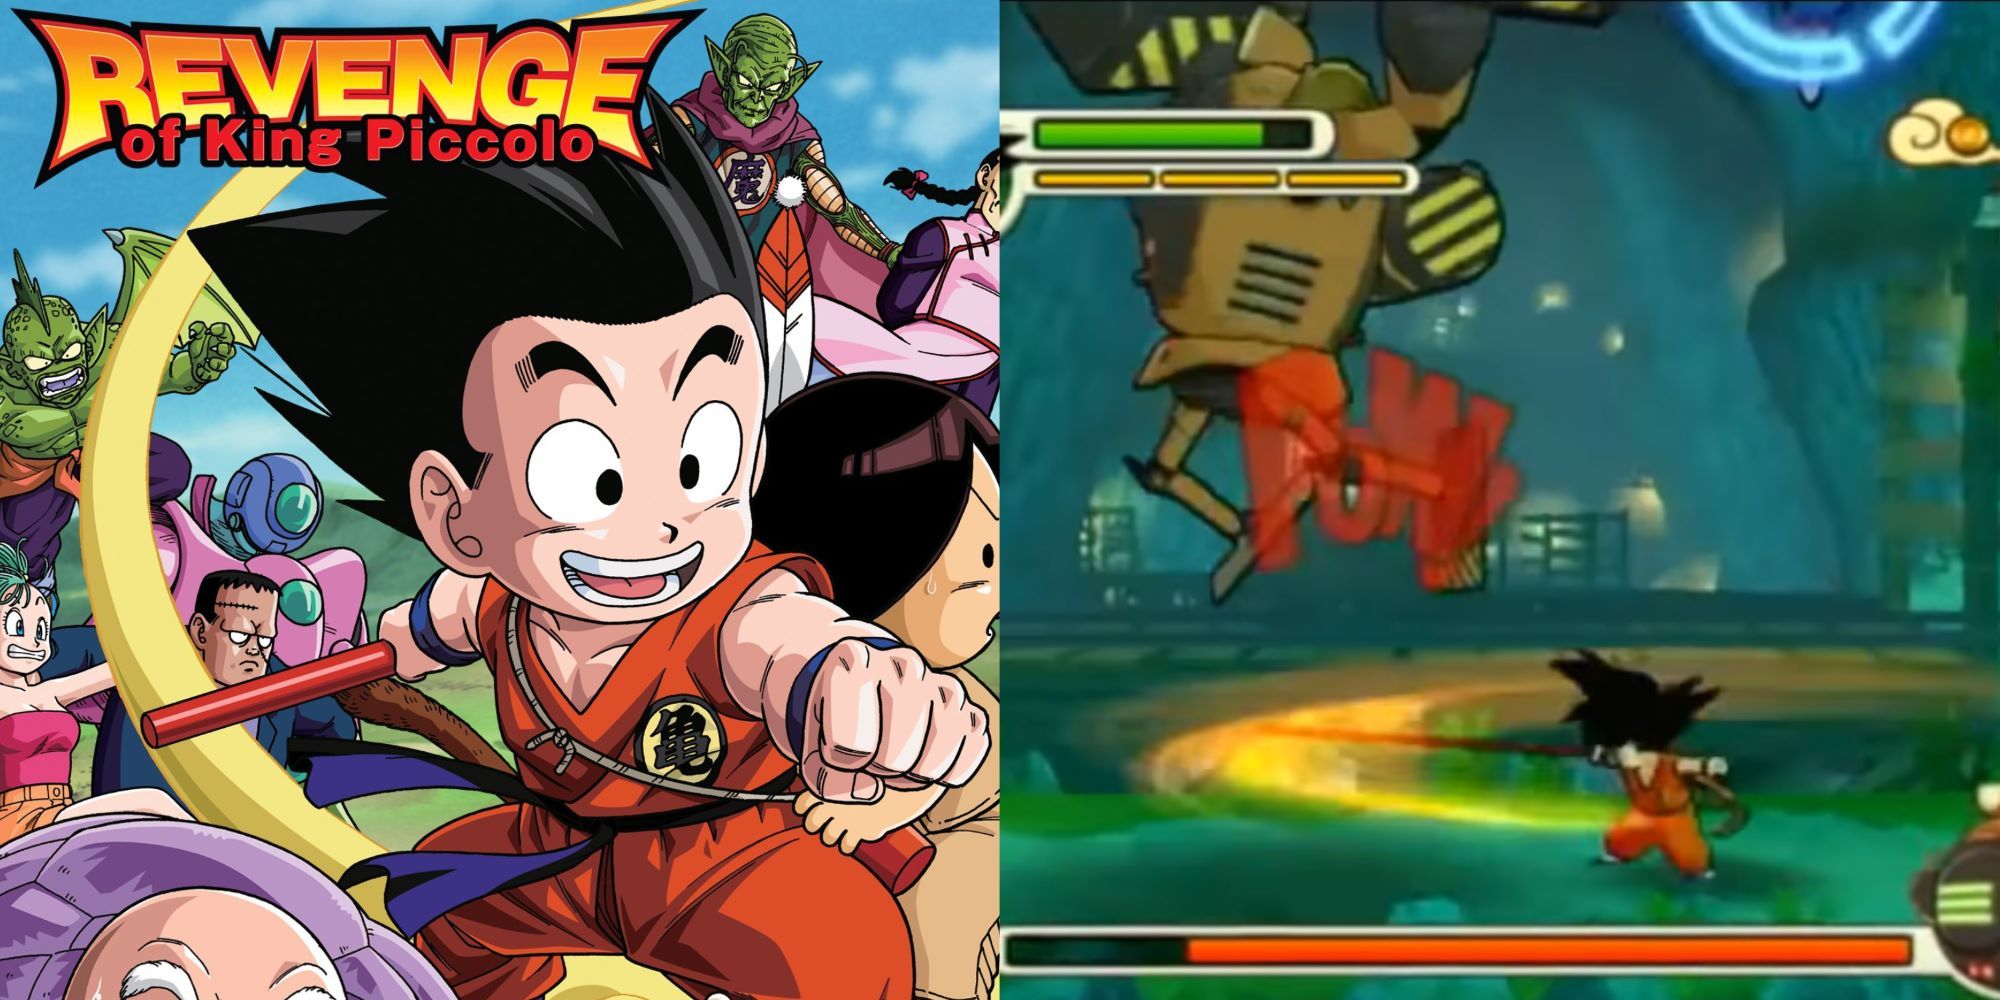 dragon ball revenge of king piccolo cover with goku and cast and goku fighting robot boss gameplay